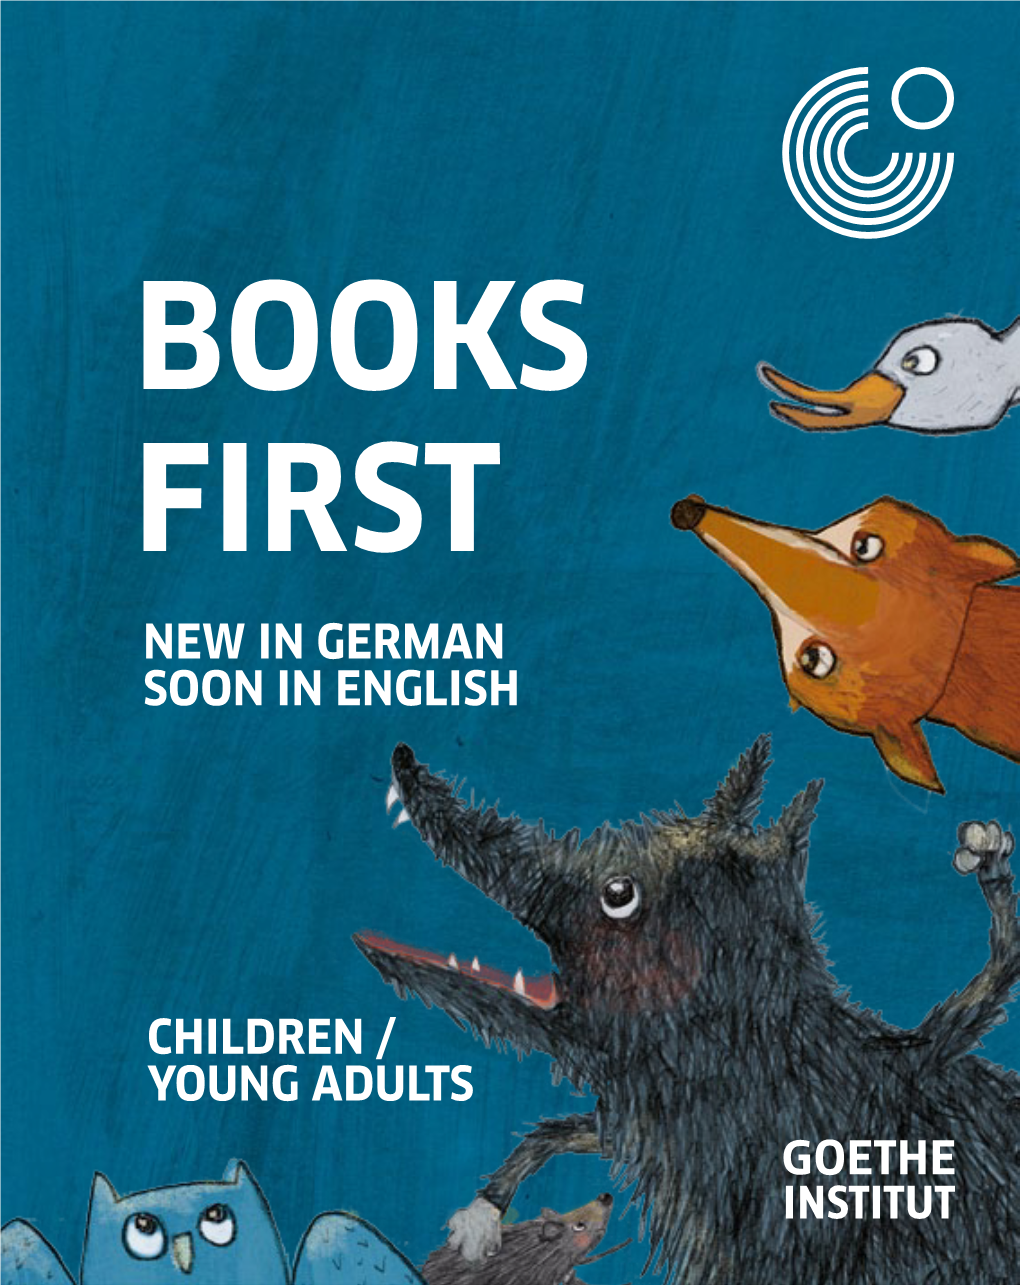 Children / Young Adults New in German Soon in English